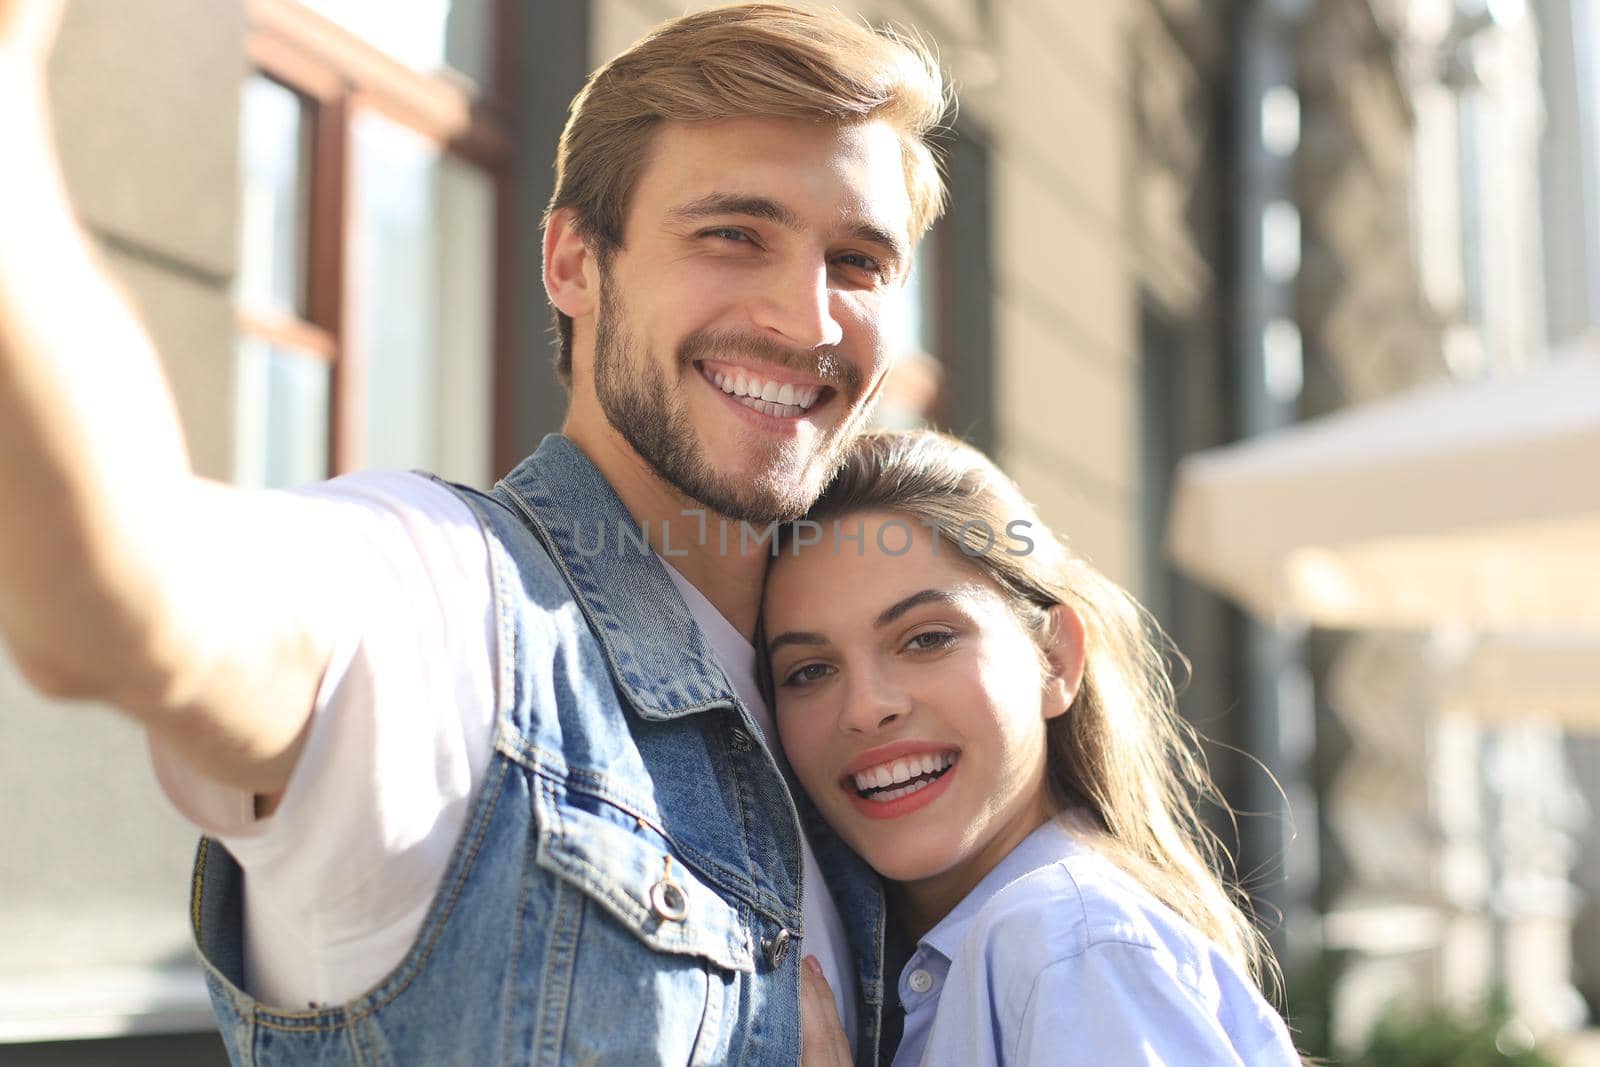 Beautiful lovely young couple walking at the city streets, hugging while taking a selfie